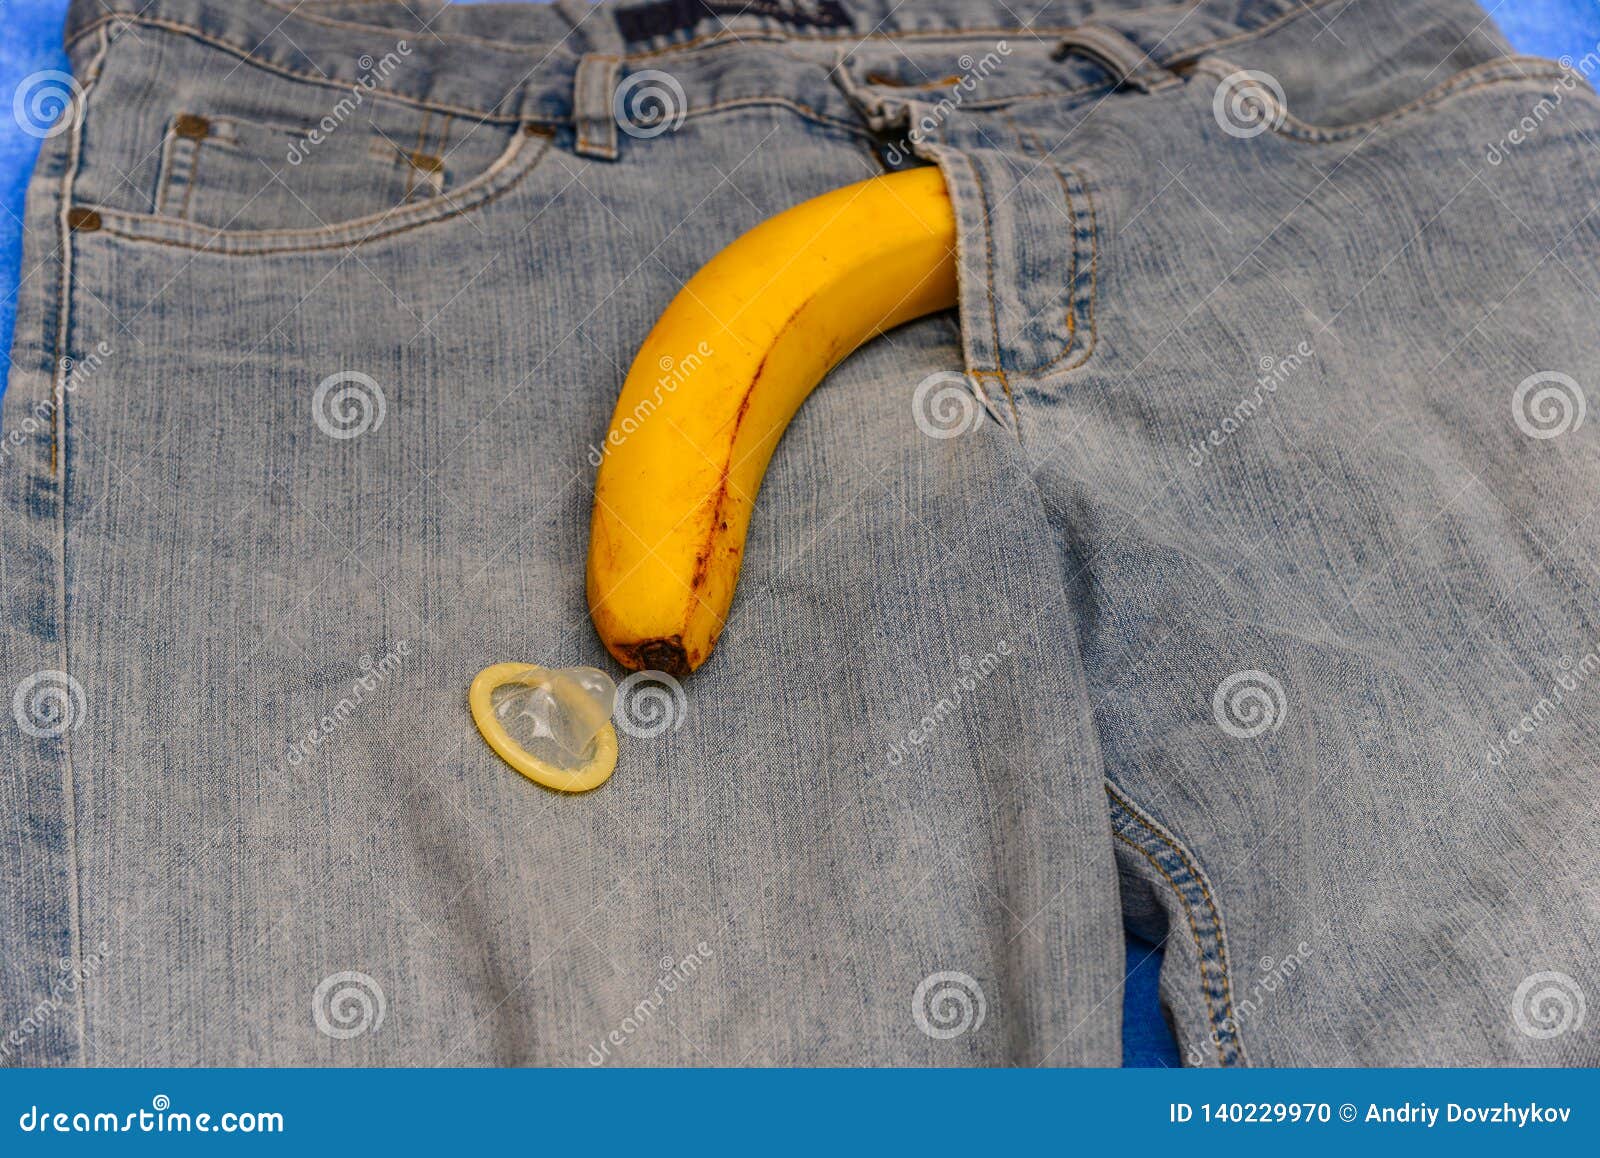 chan soon recommends penis sticking out of pants pic